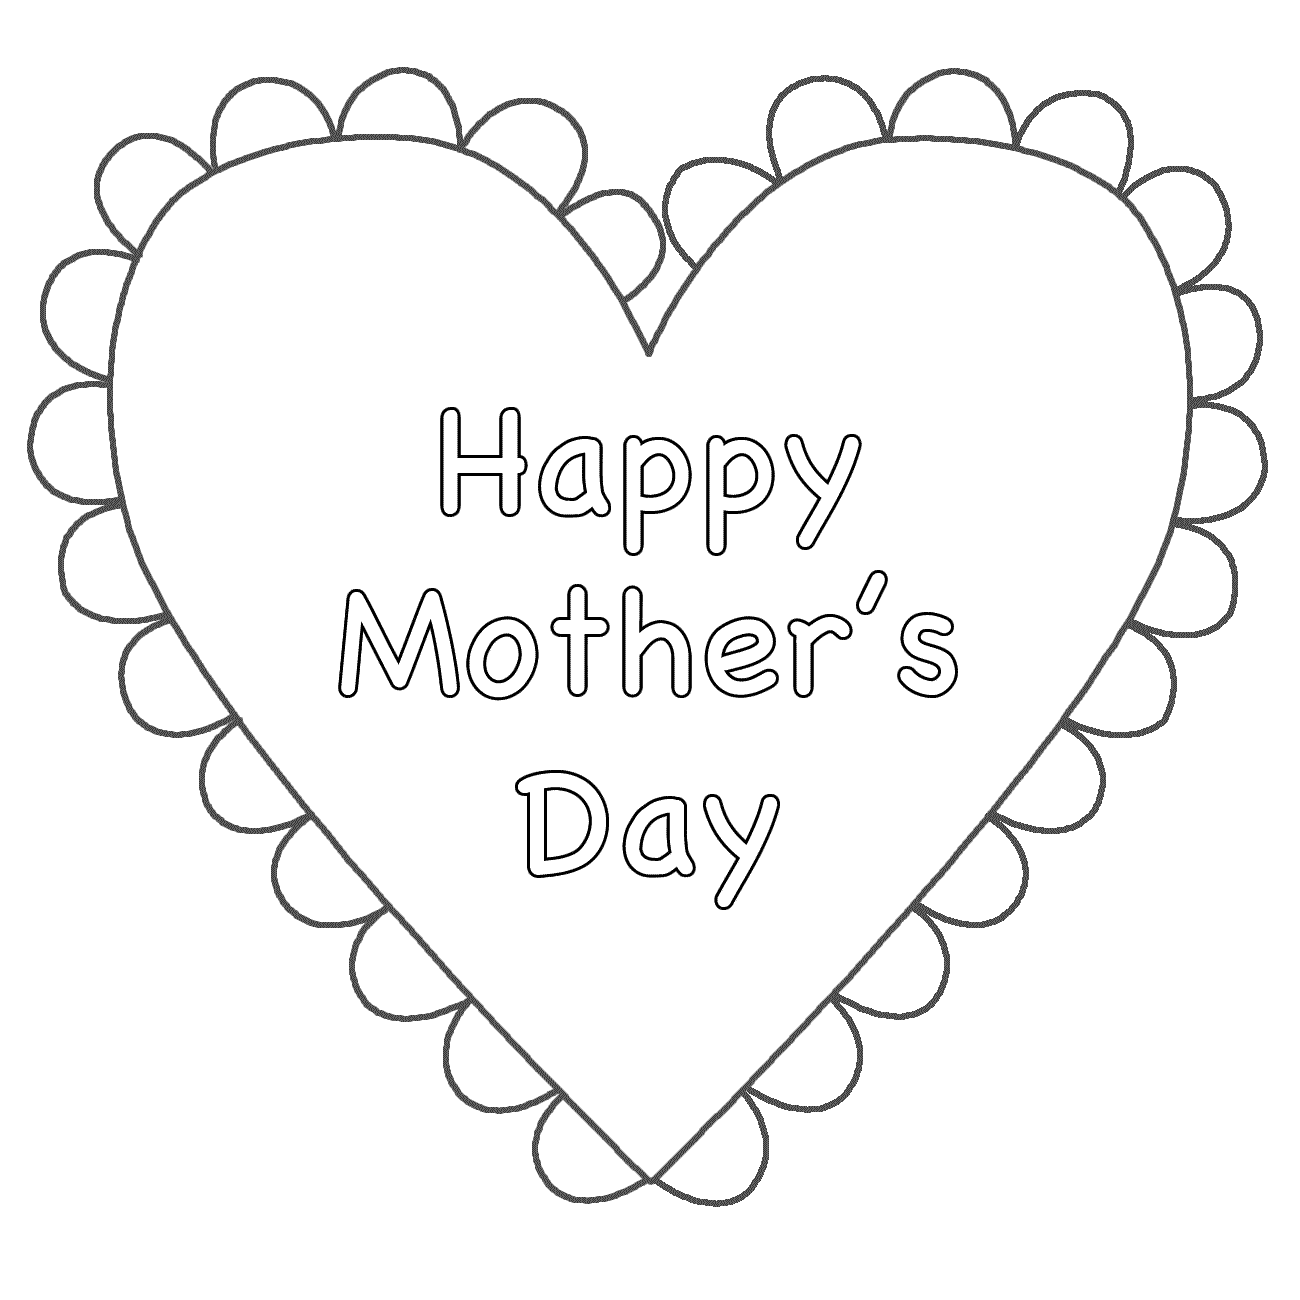 30 Free and Printable Mother's Day Coloring Cards ...